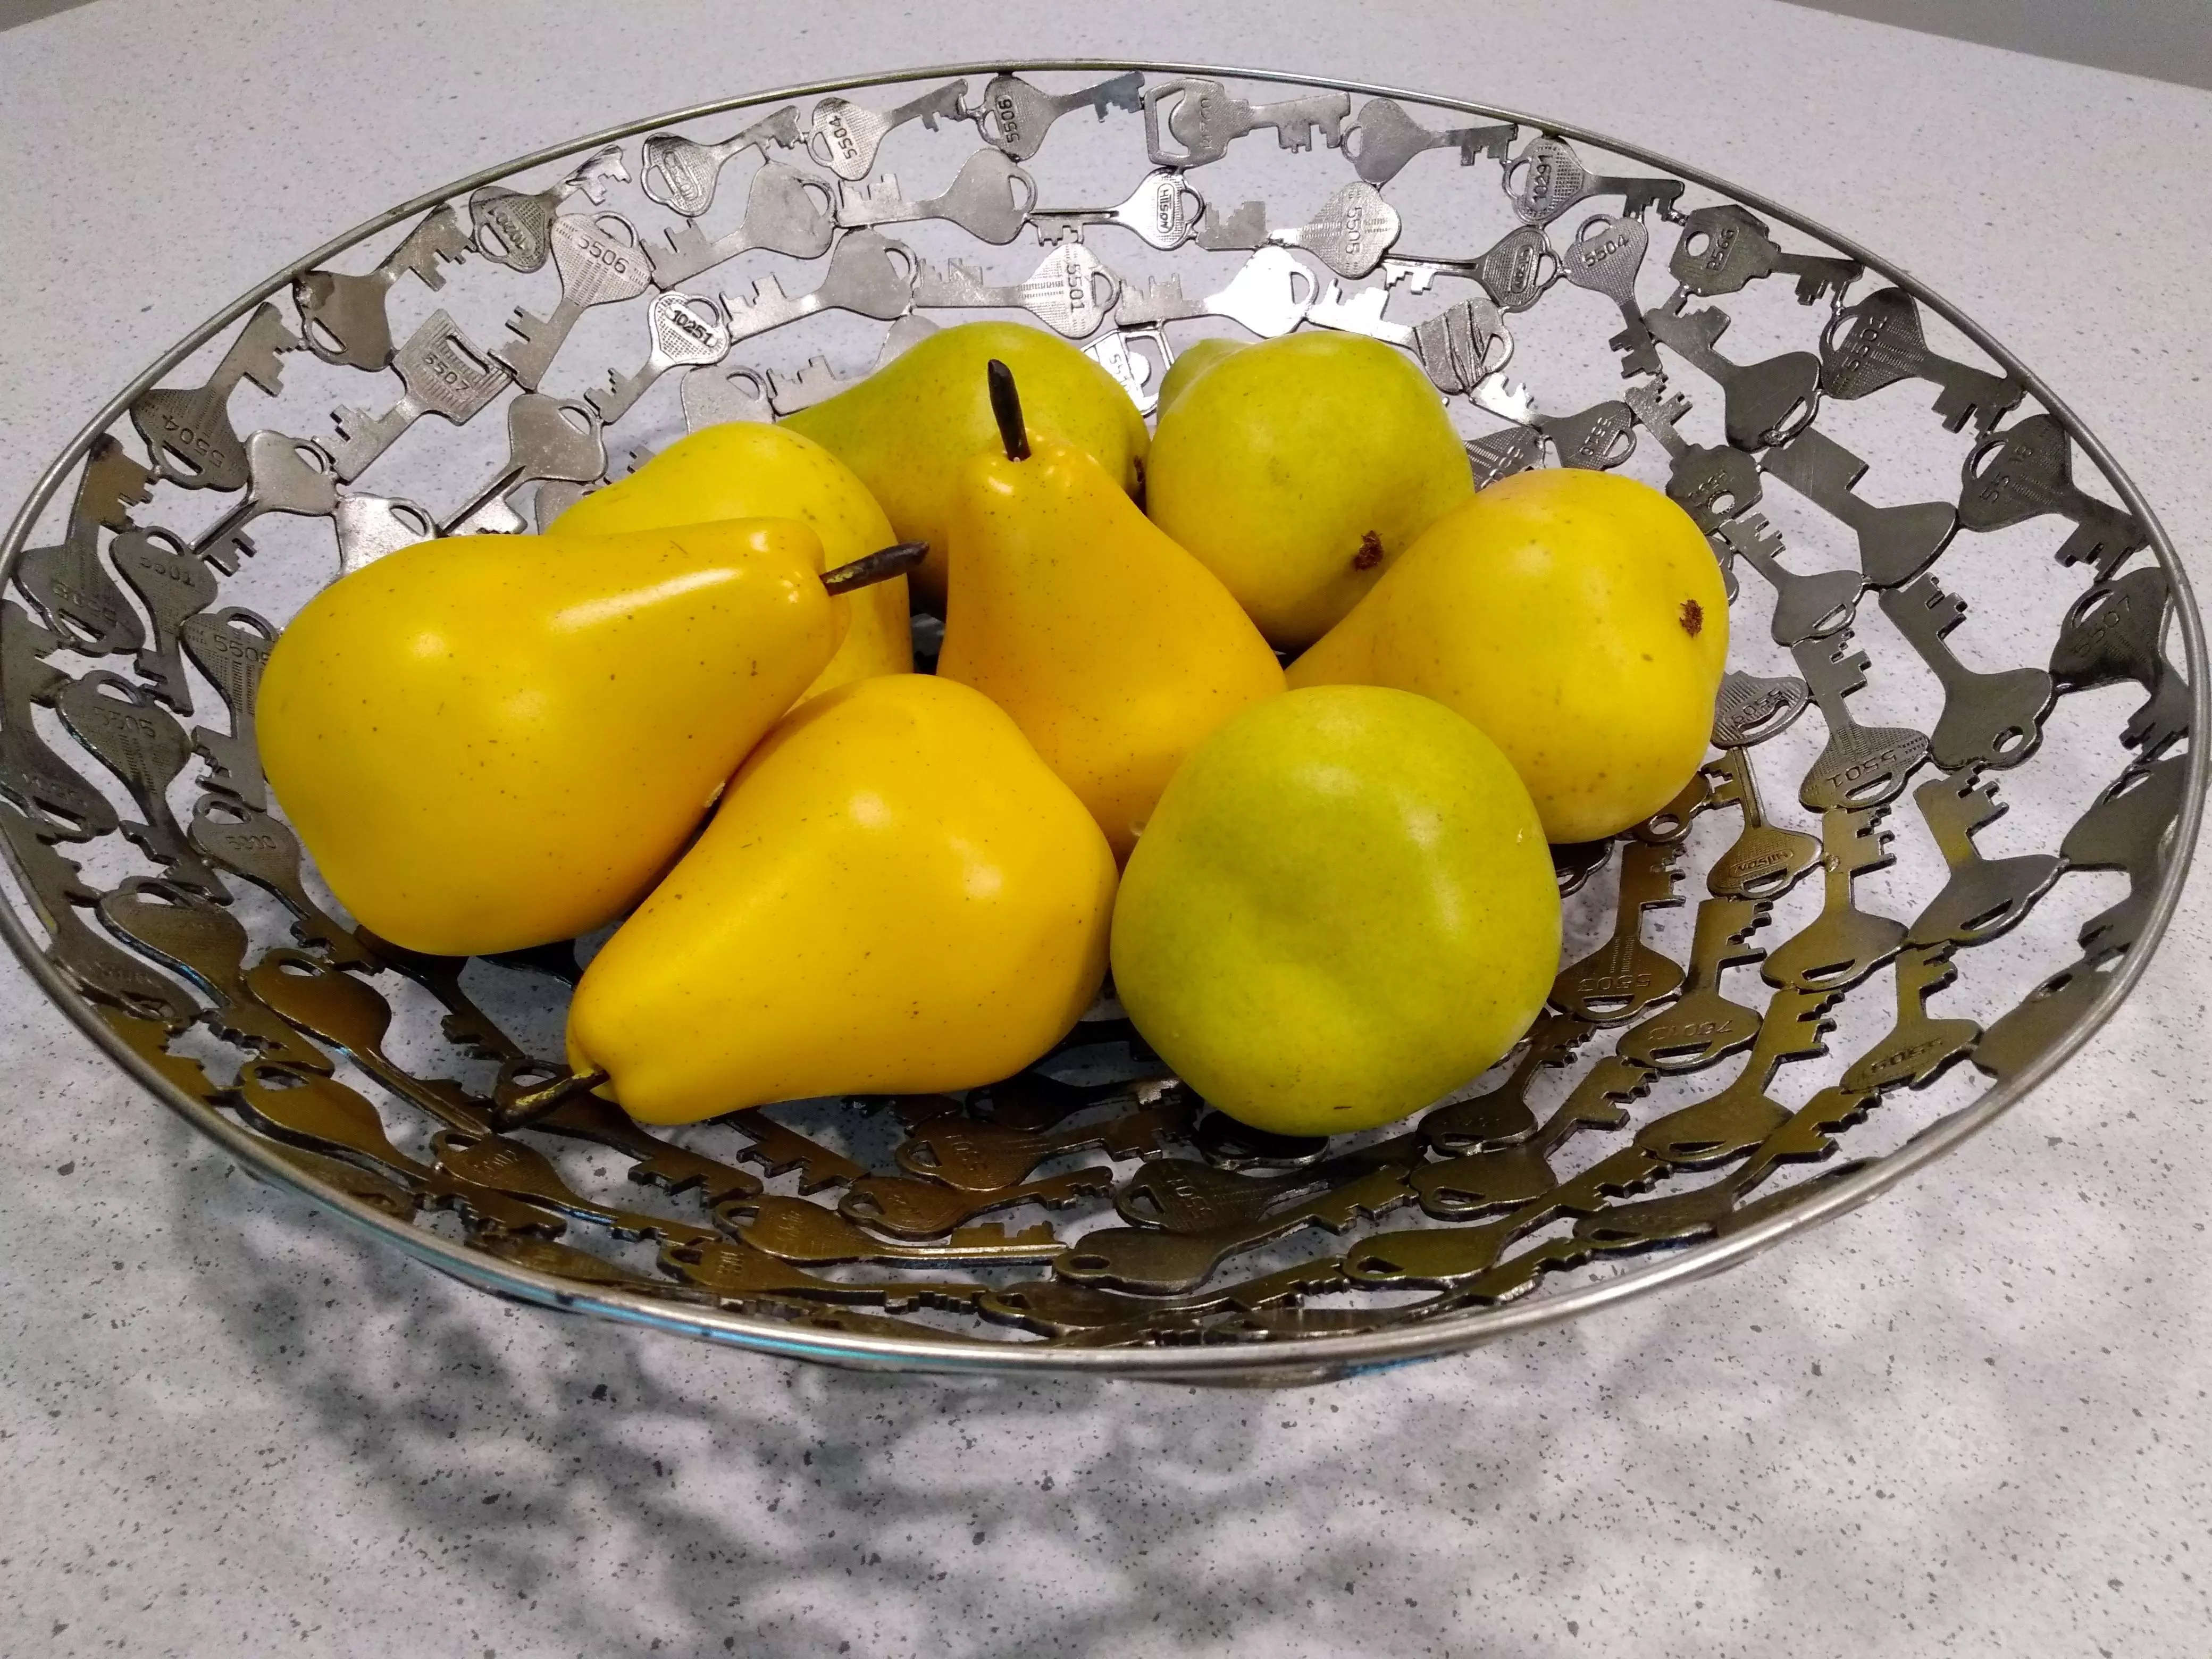 Plastic yellow pears in a silver fruit bowl